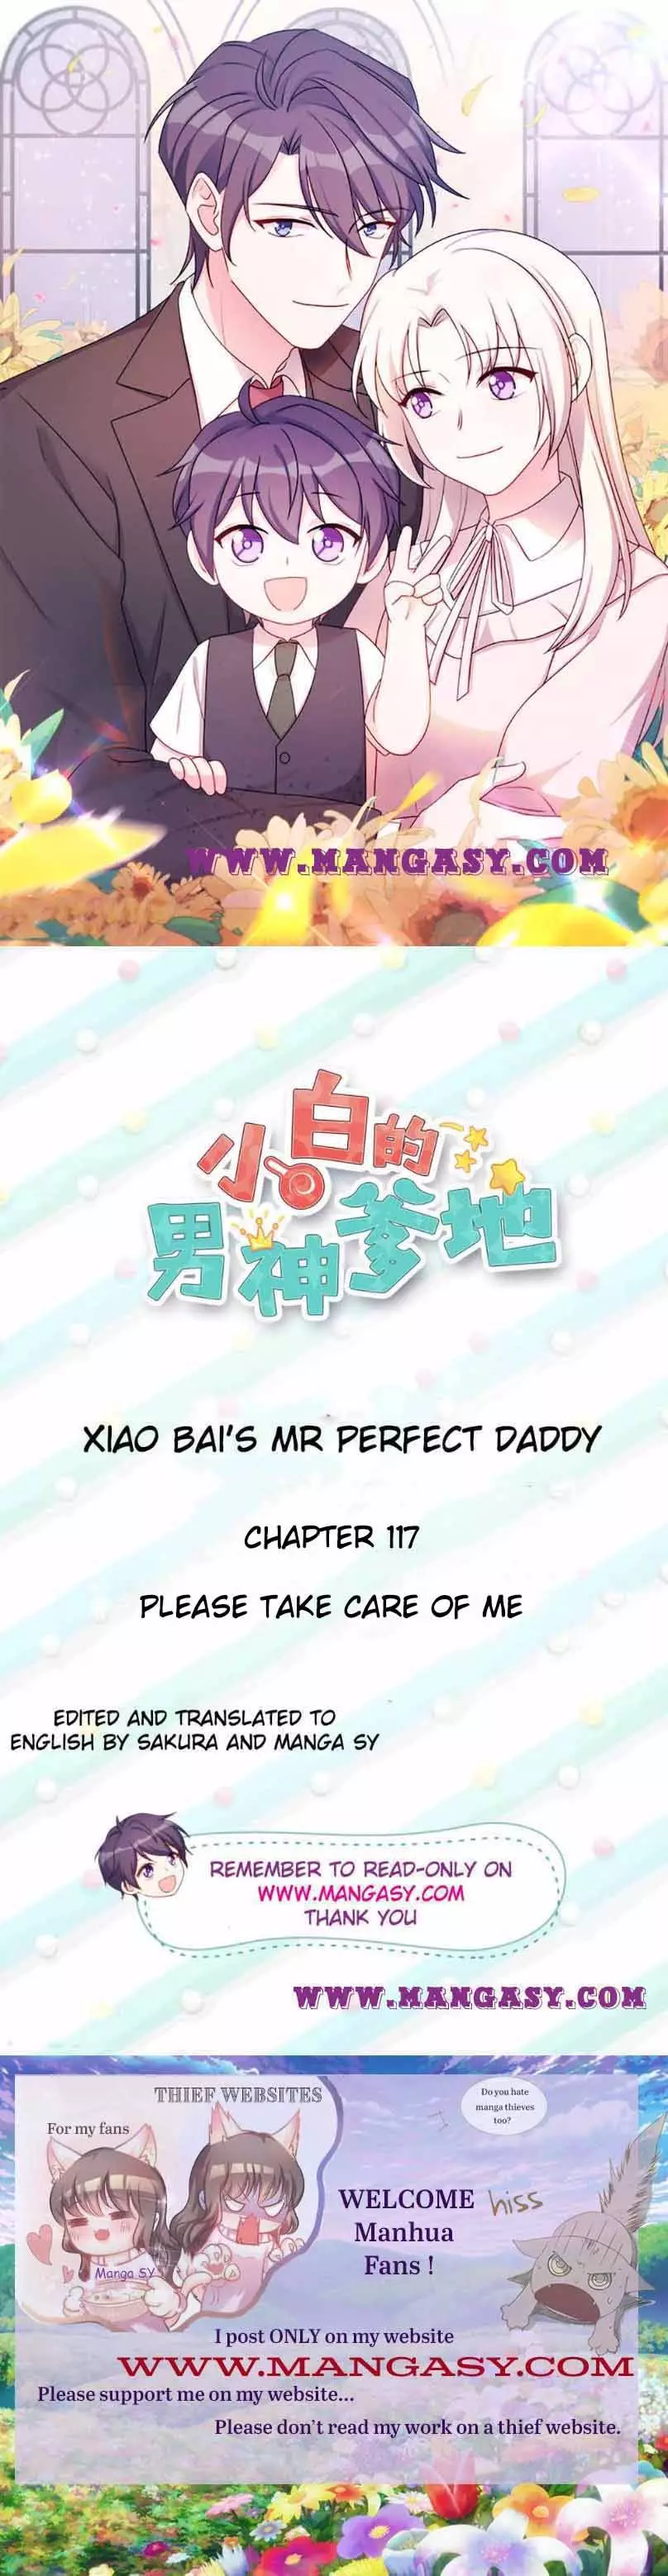 Xiao Bai’S Father Is A Wonderful Person - 117 page 1-6d1fe585